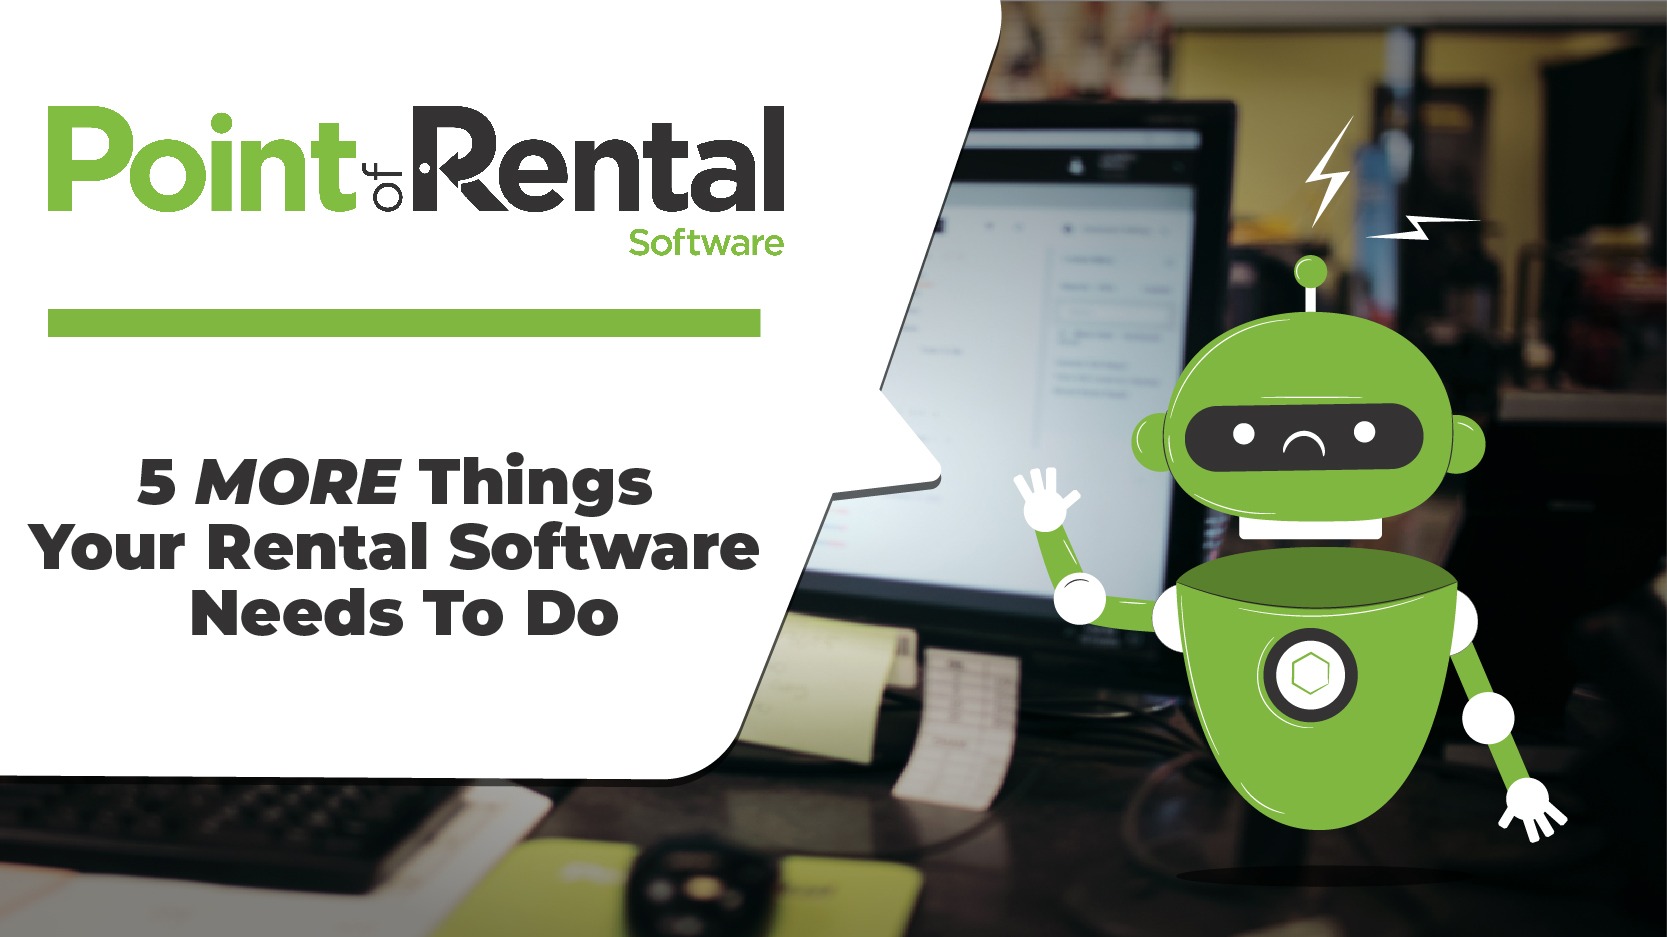 A robot saying "5 MORE things your rental software needs to do"